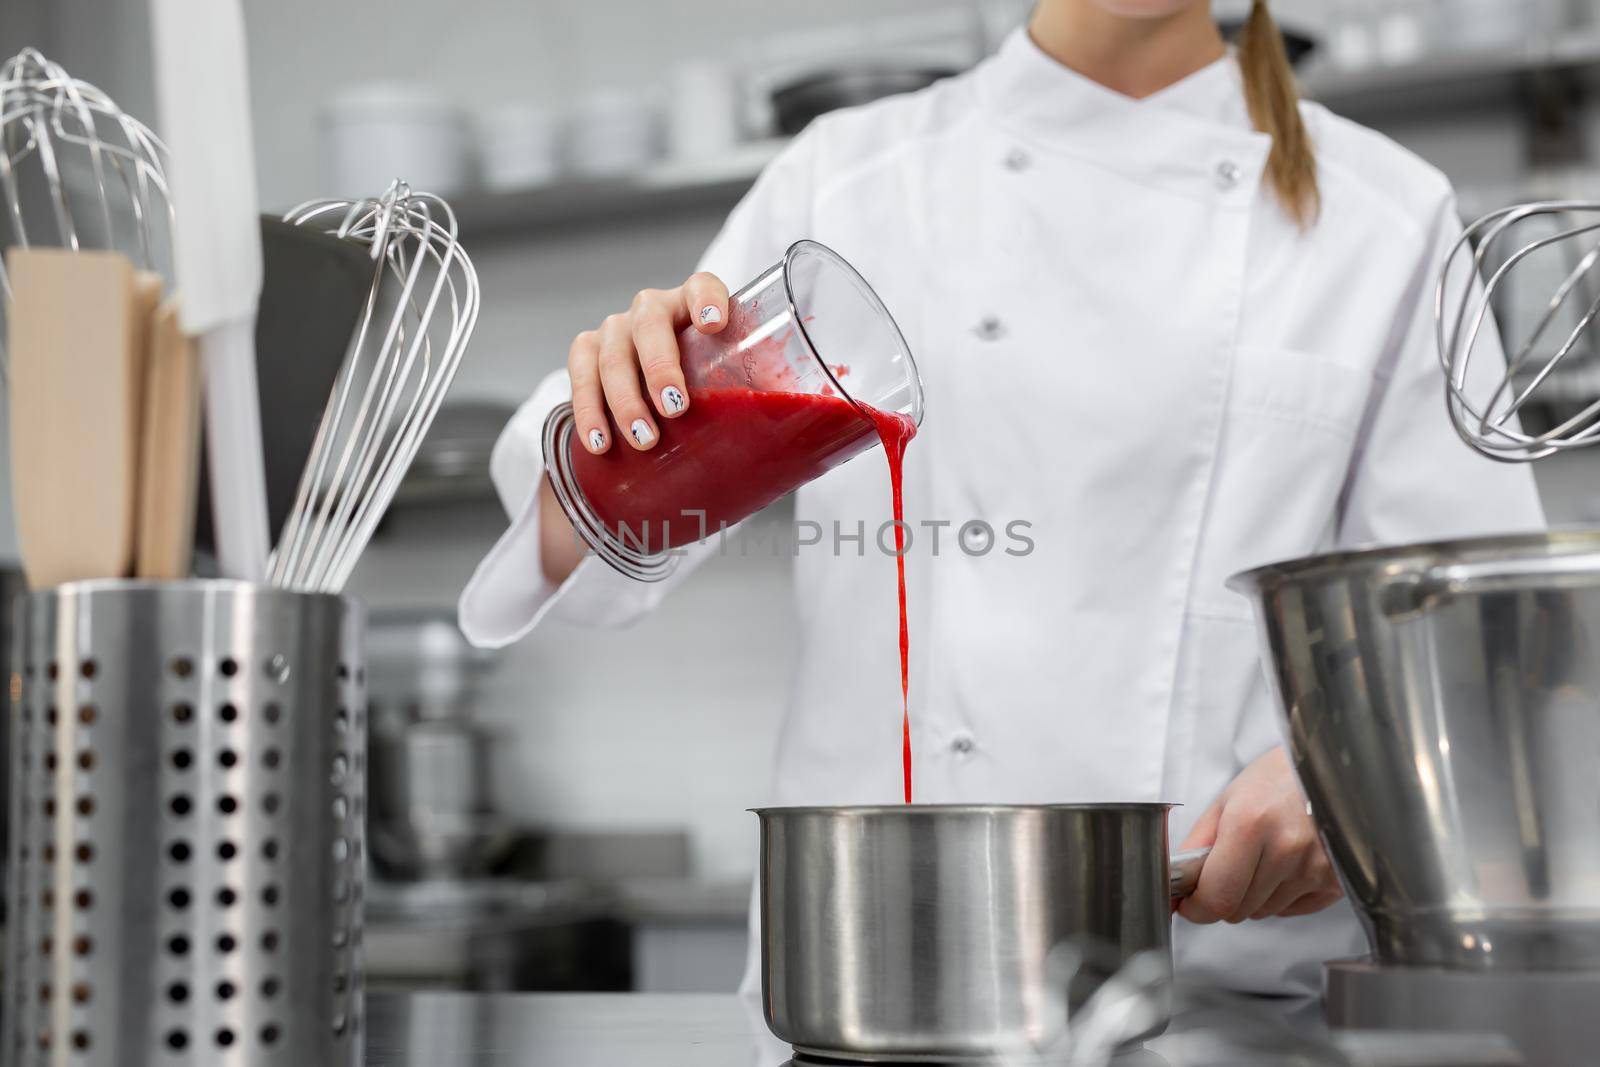 Pastry chef pours strawberry puree into a saucepan.